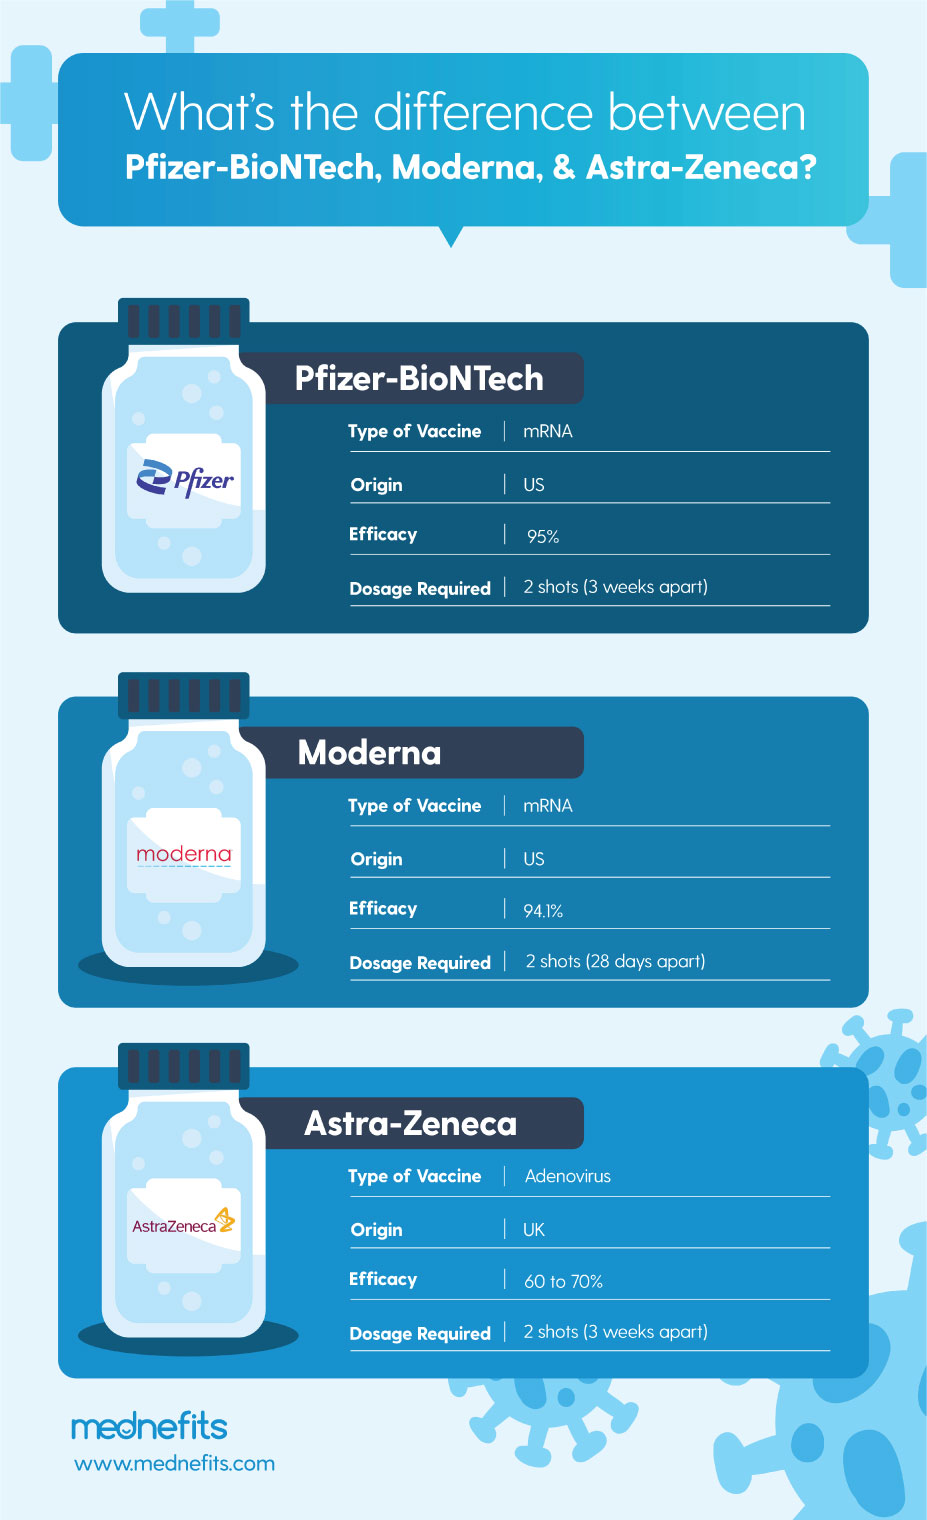 What's the difference between Pfizer-BioNTech, Moderna, & Astra-Zeneca